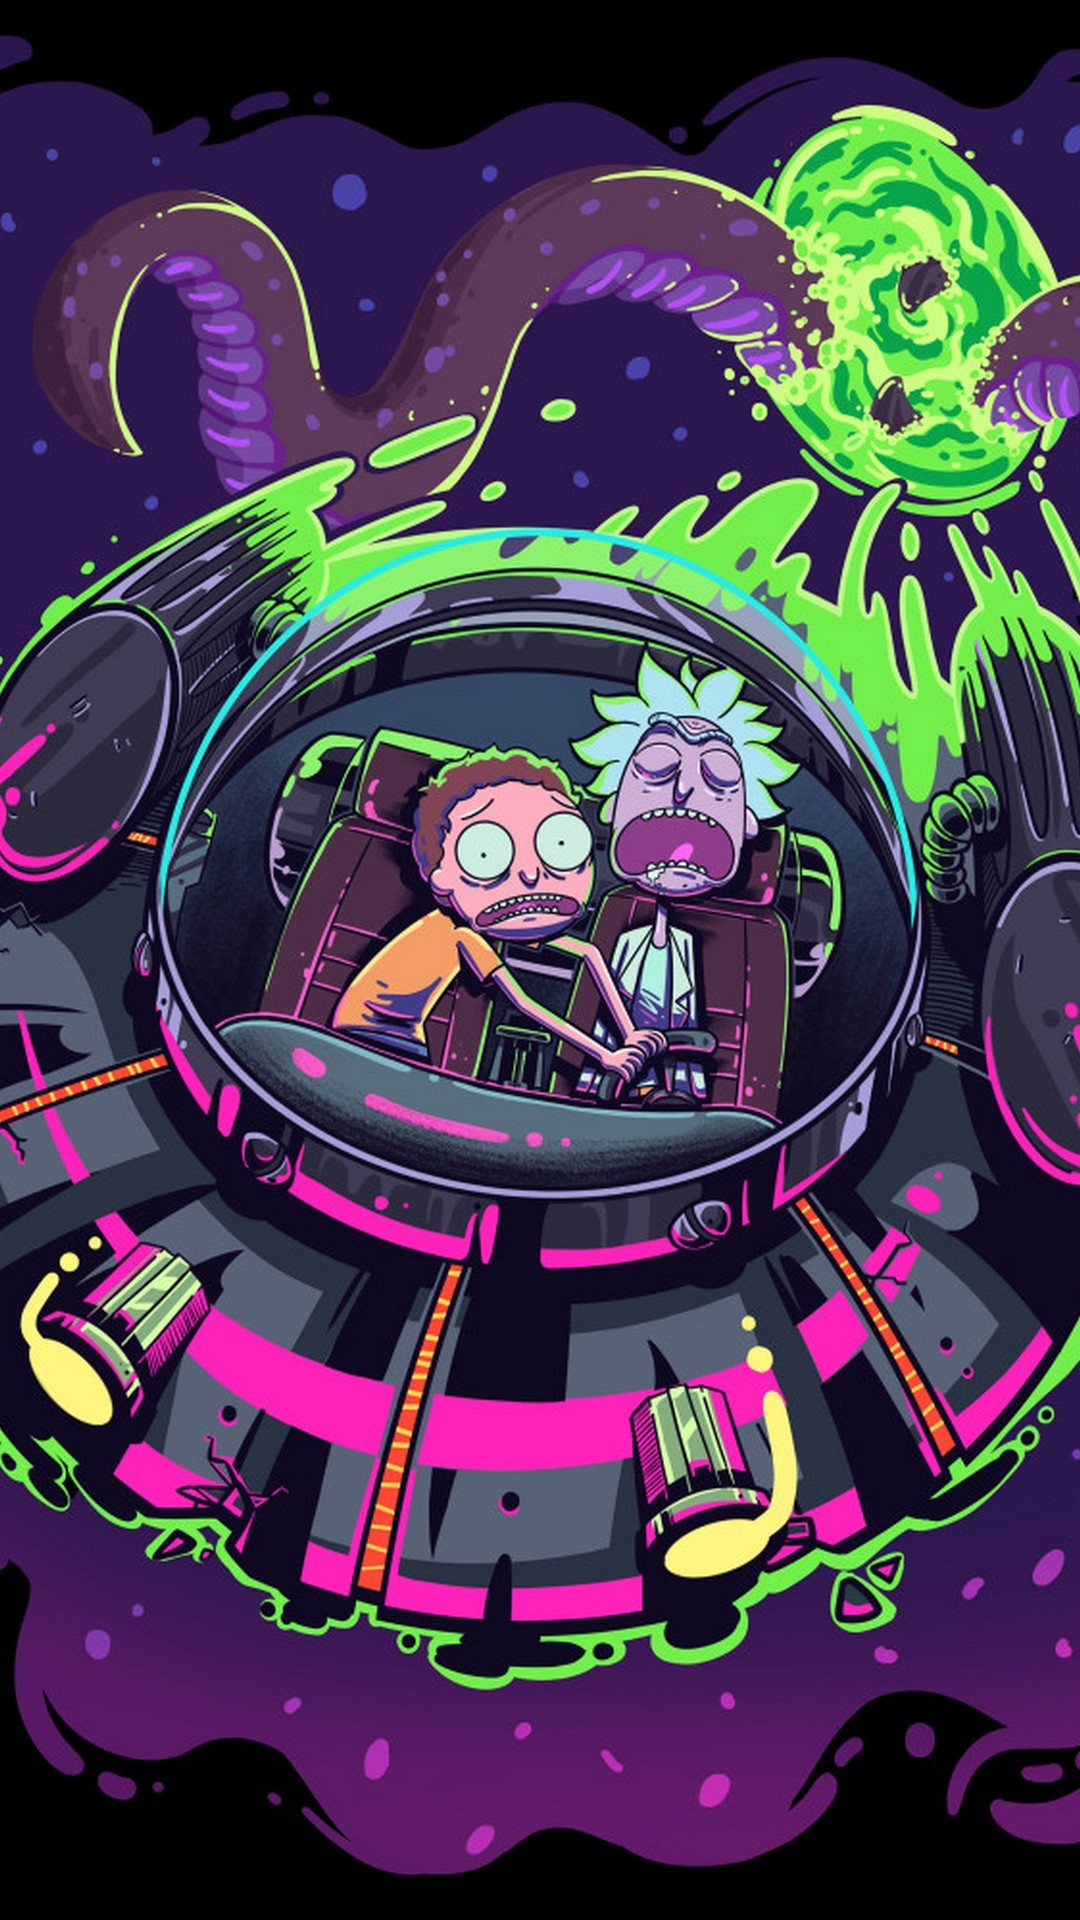 Rick and Morty Season 3 Wallpapers (87+ images)